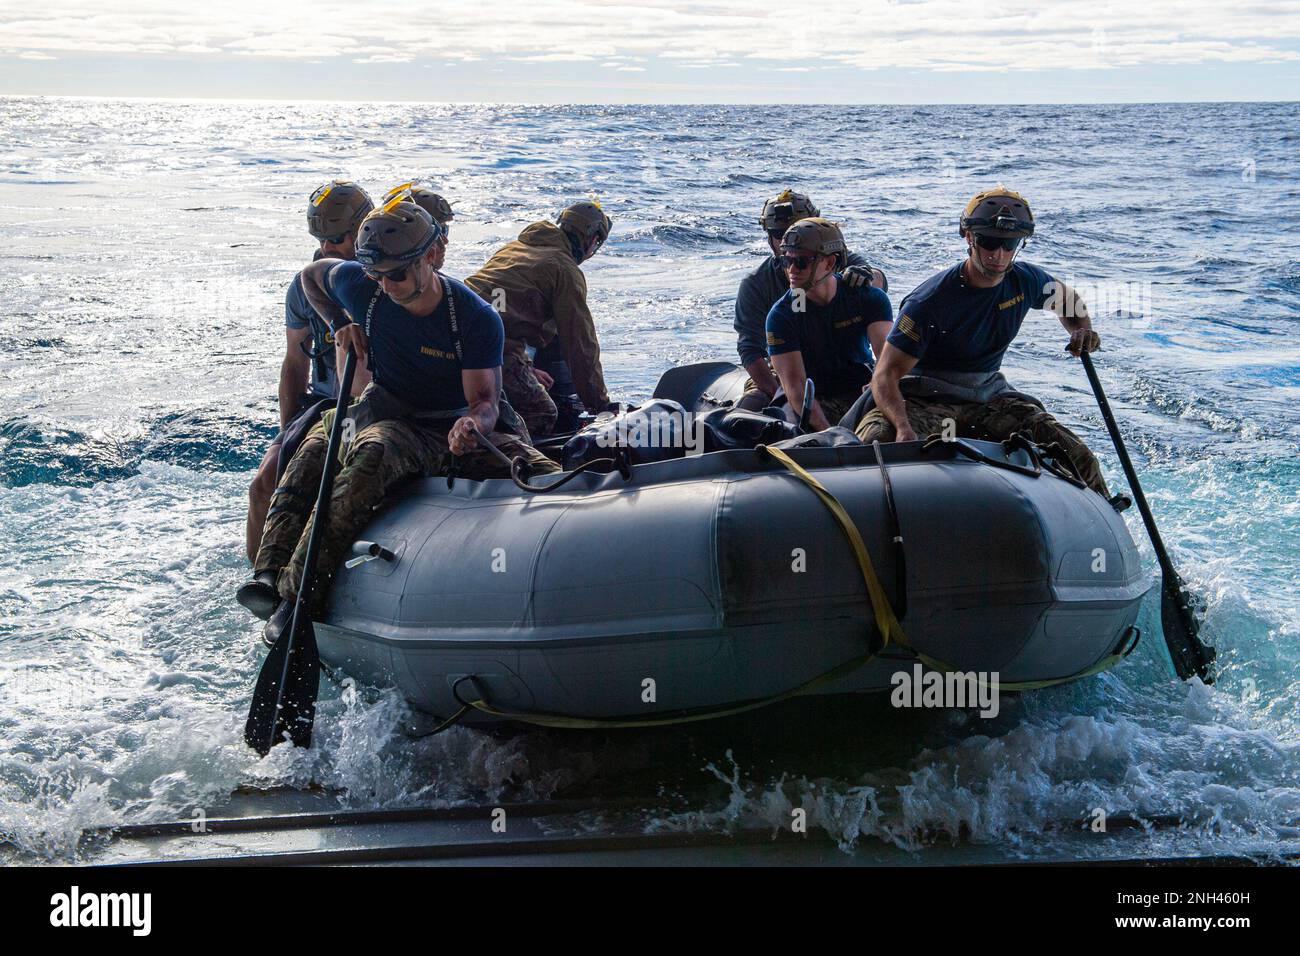 221211-N-NM271-2267 PACIFIC OCEAN (Dec. 11, 2022) Navy Divers attached to Explosive Ordnance Disposal Expeditionary Support Unit One deploy a combat rubber raiding craft from the well deck of amphibious transport dock USS Portland (LPD 27) during the NASA Artemis I Orion spacecraft recovery, Dec. 11, 2022. Portland, along with Independence-variant littoral combat ship USS Montgomery (LCS 8), is underway in U.S. 3rd Fleet in support of the recovery. The retrieval operation is part of a Department of Defense effort that integrates combatant command service capabilities to determine best practice Stock Photo